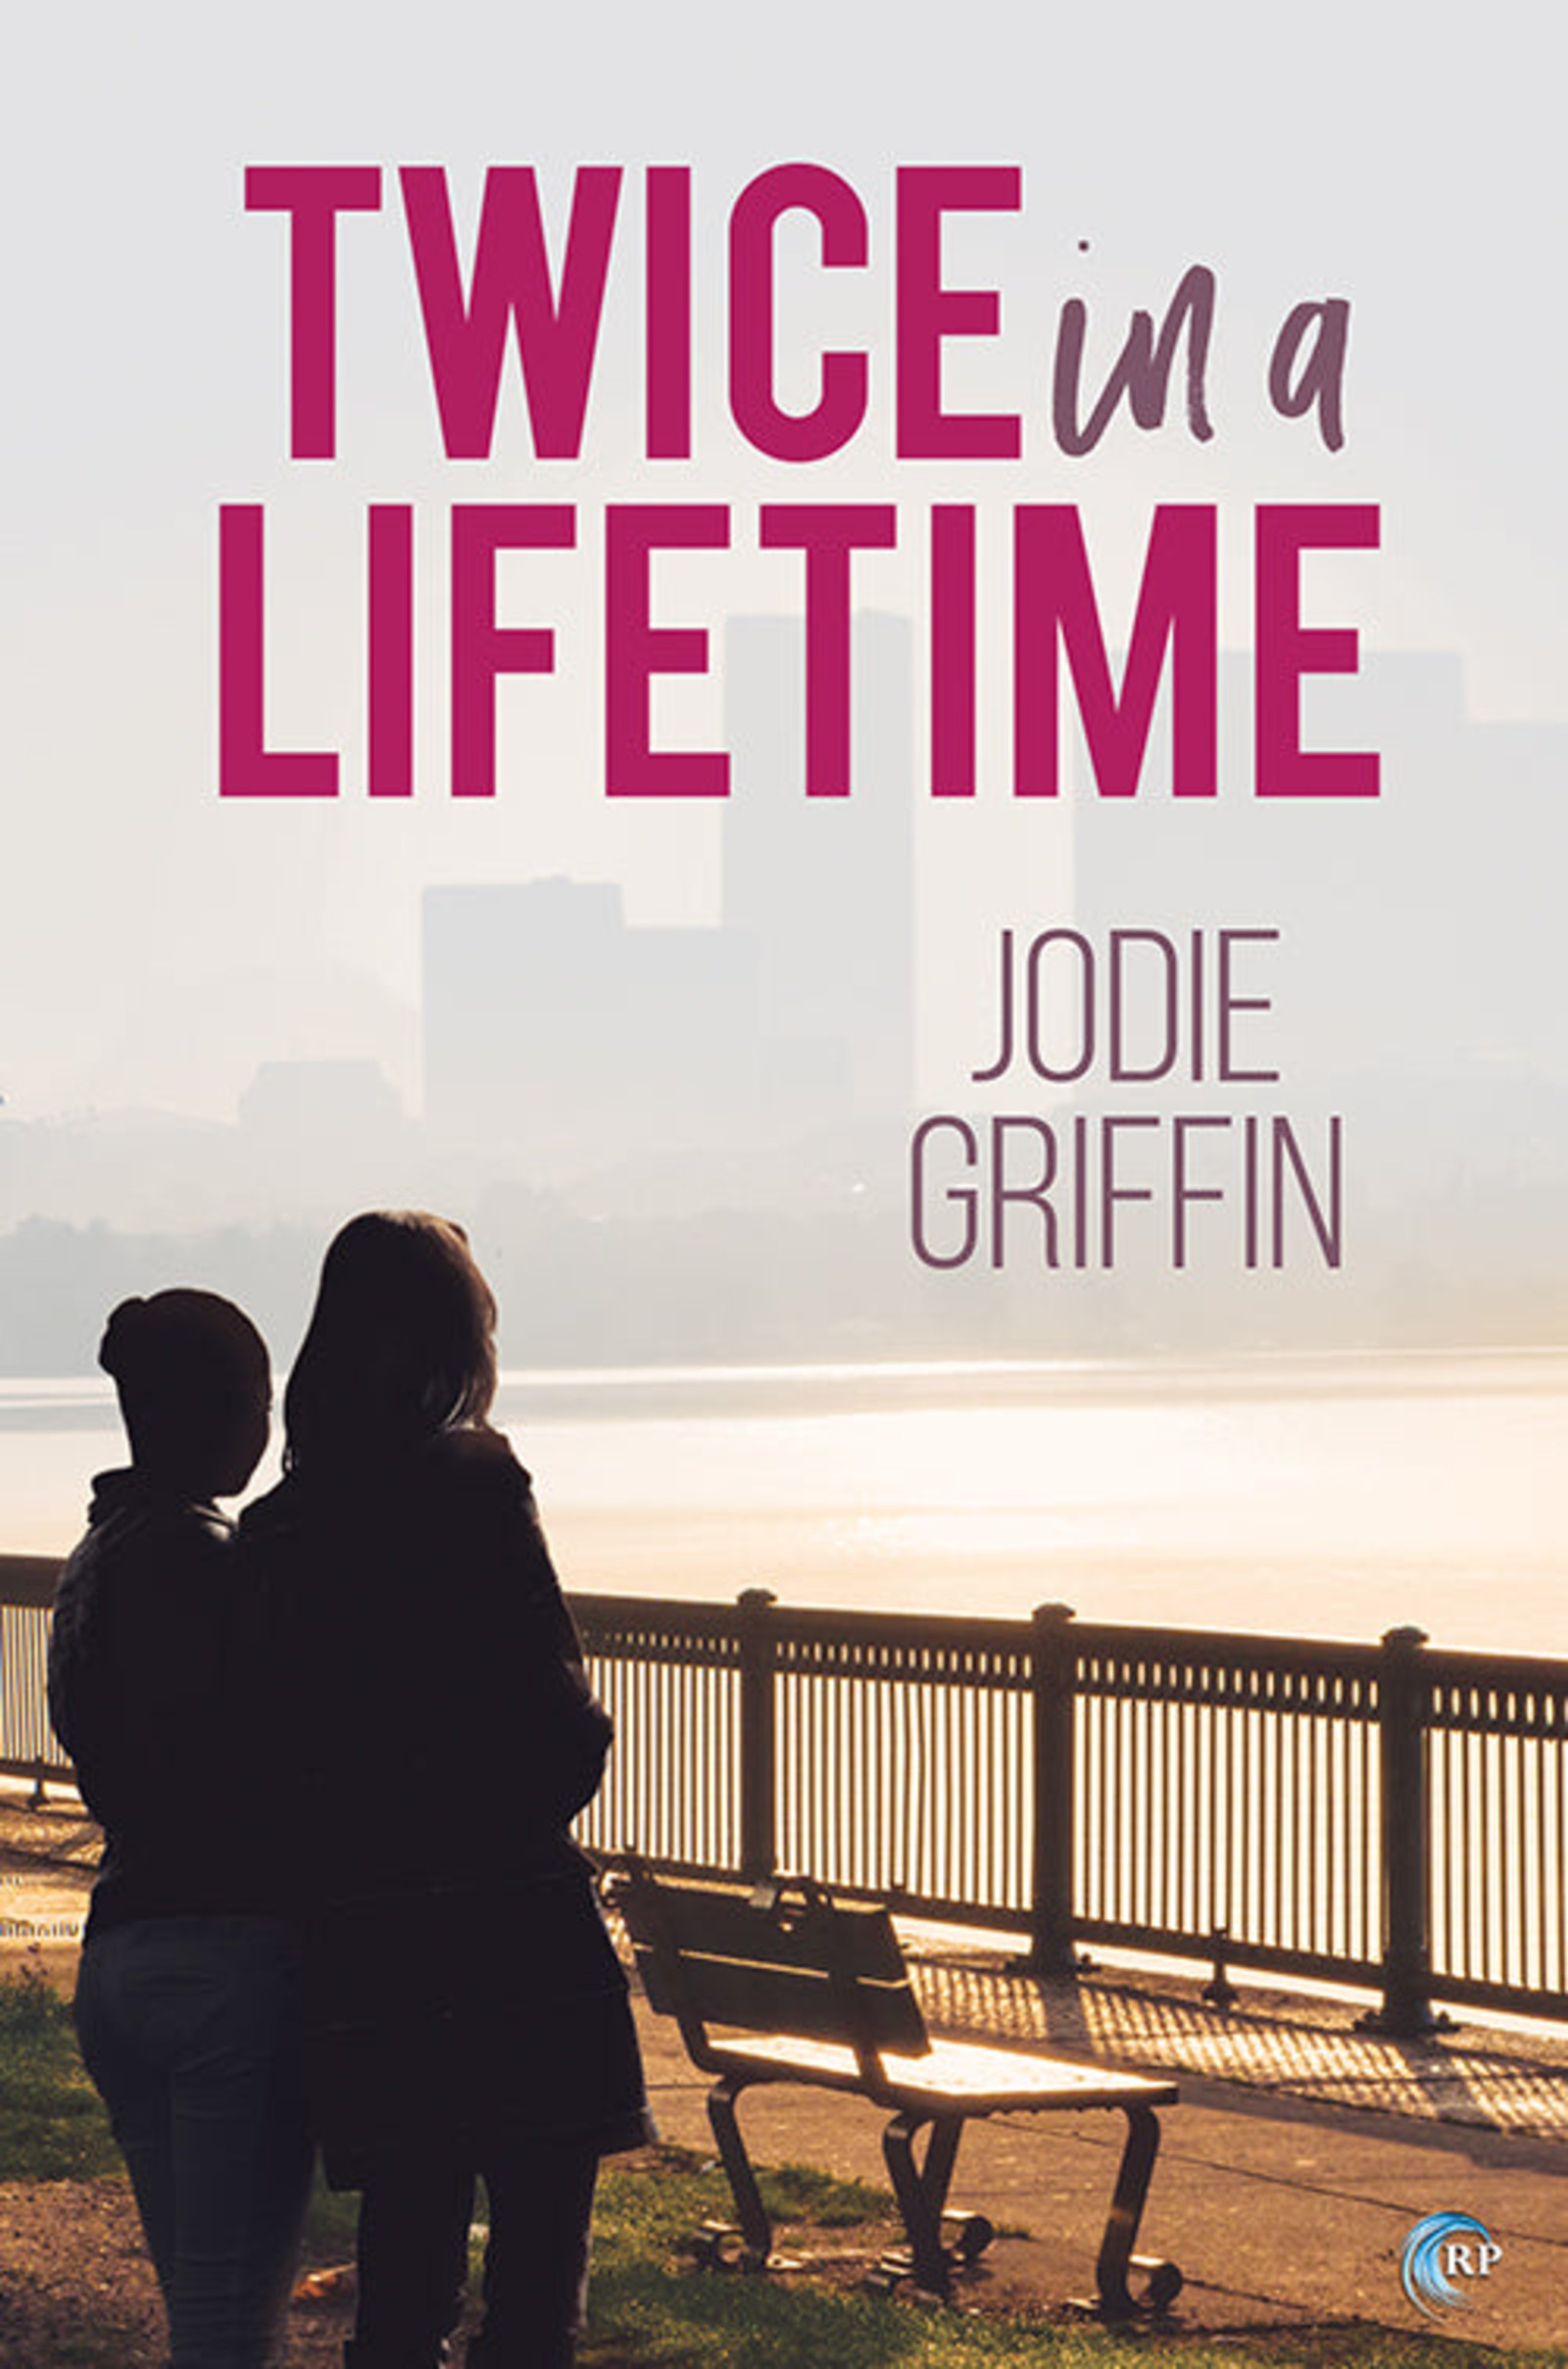 Book Cover of Twice In A Lifetime by Jodie Griffin